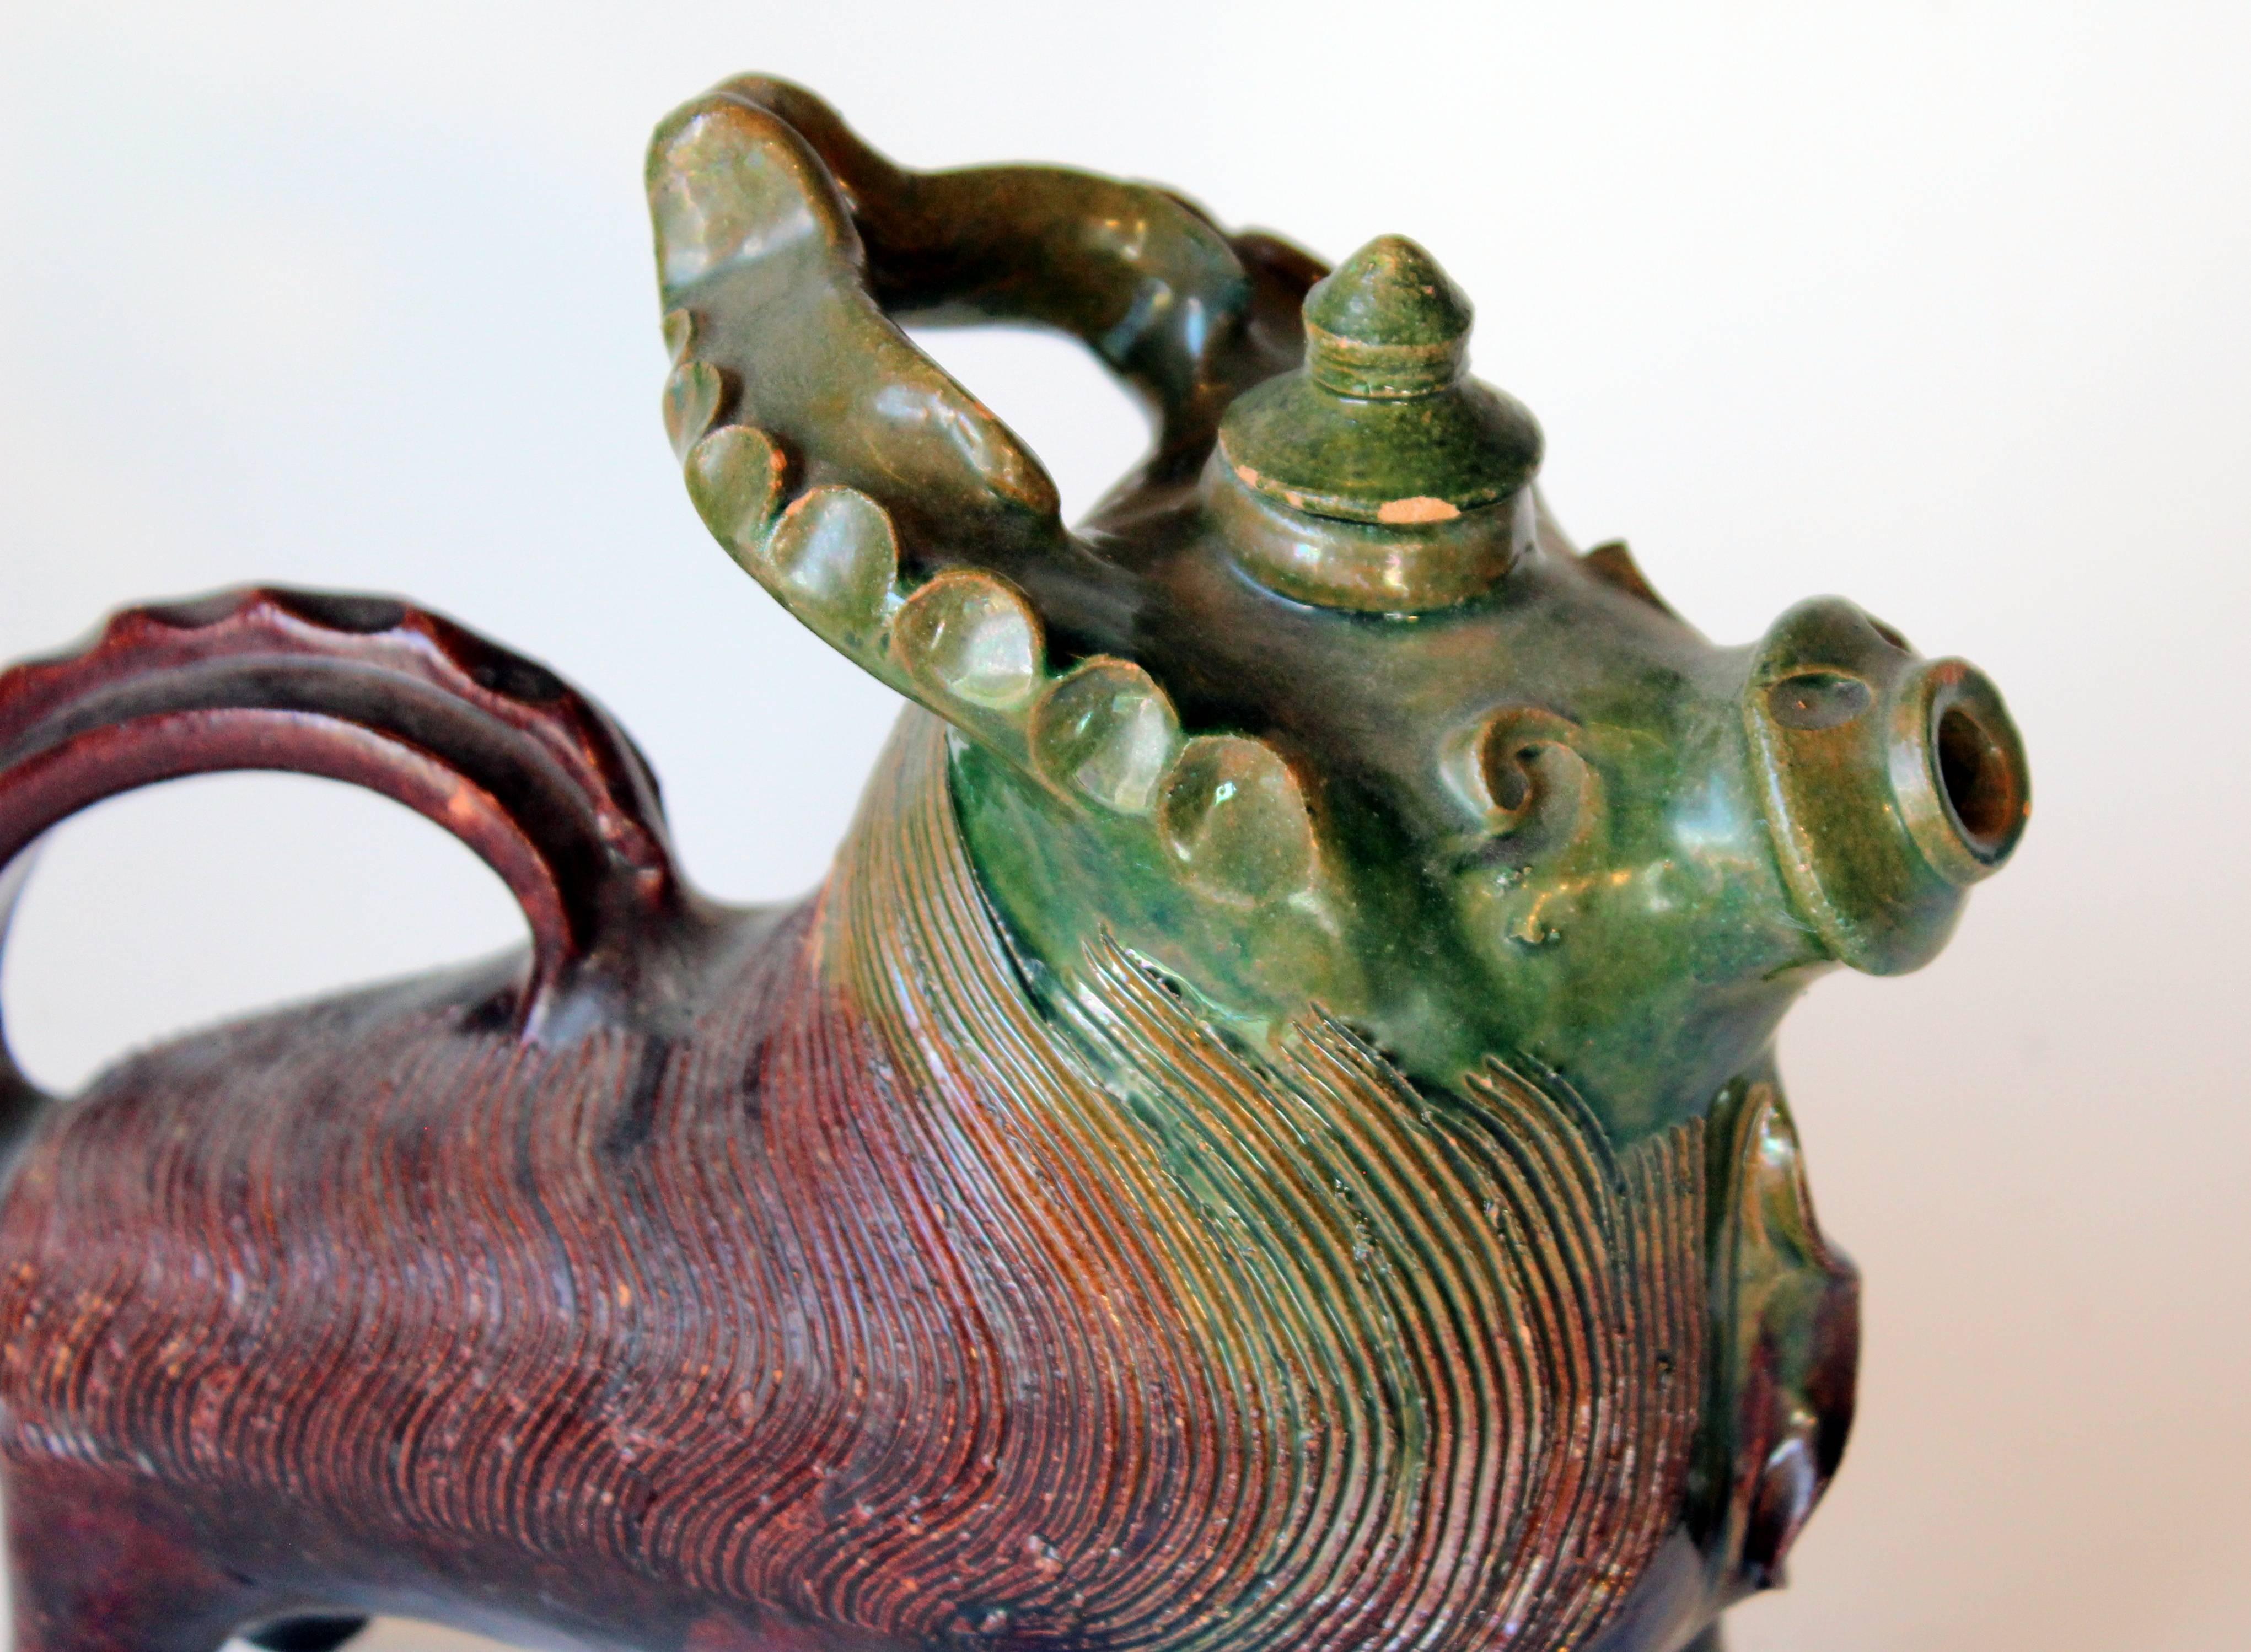 Old or Antique Studio Pottery Aquamanile Zoomorphic Ram Figure Vessel In Excellent Condition For Sale In Wilton, CT